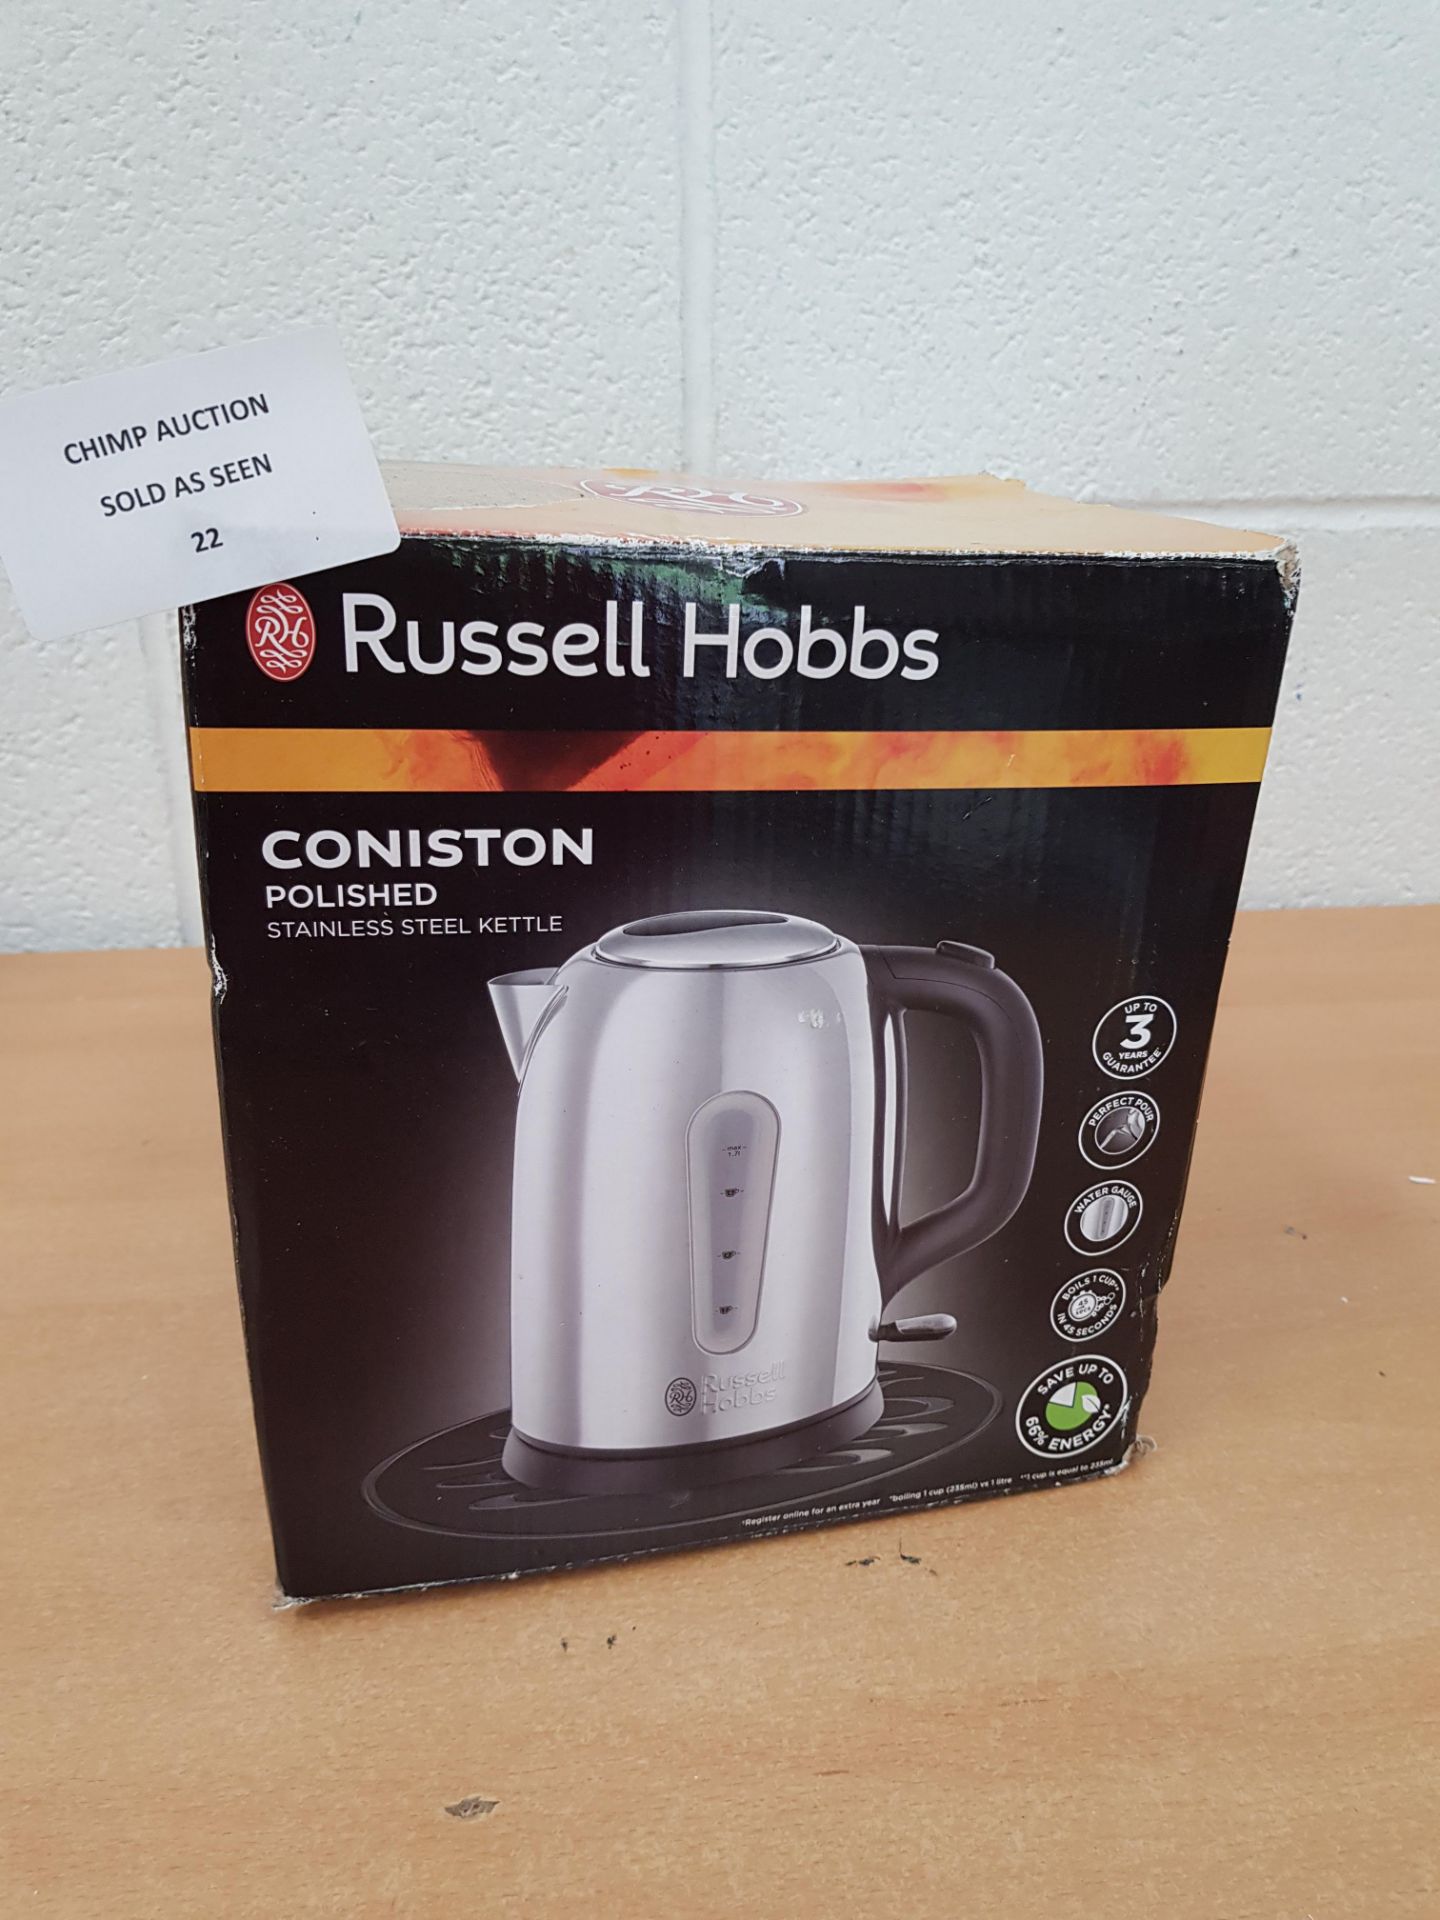 Russell Hobbs Coniston Polished Kettle